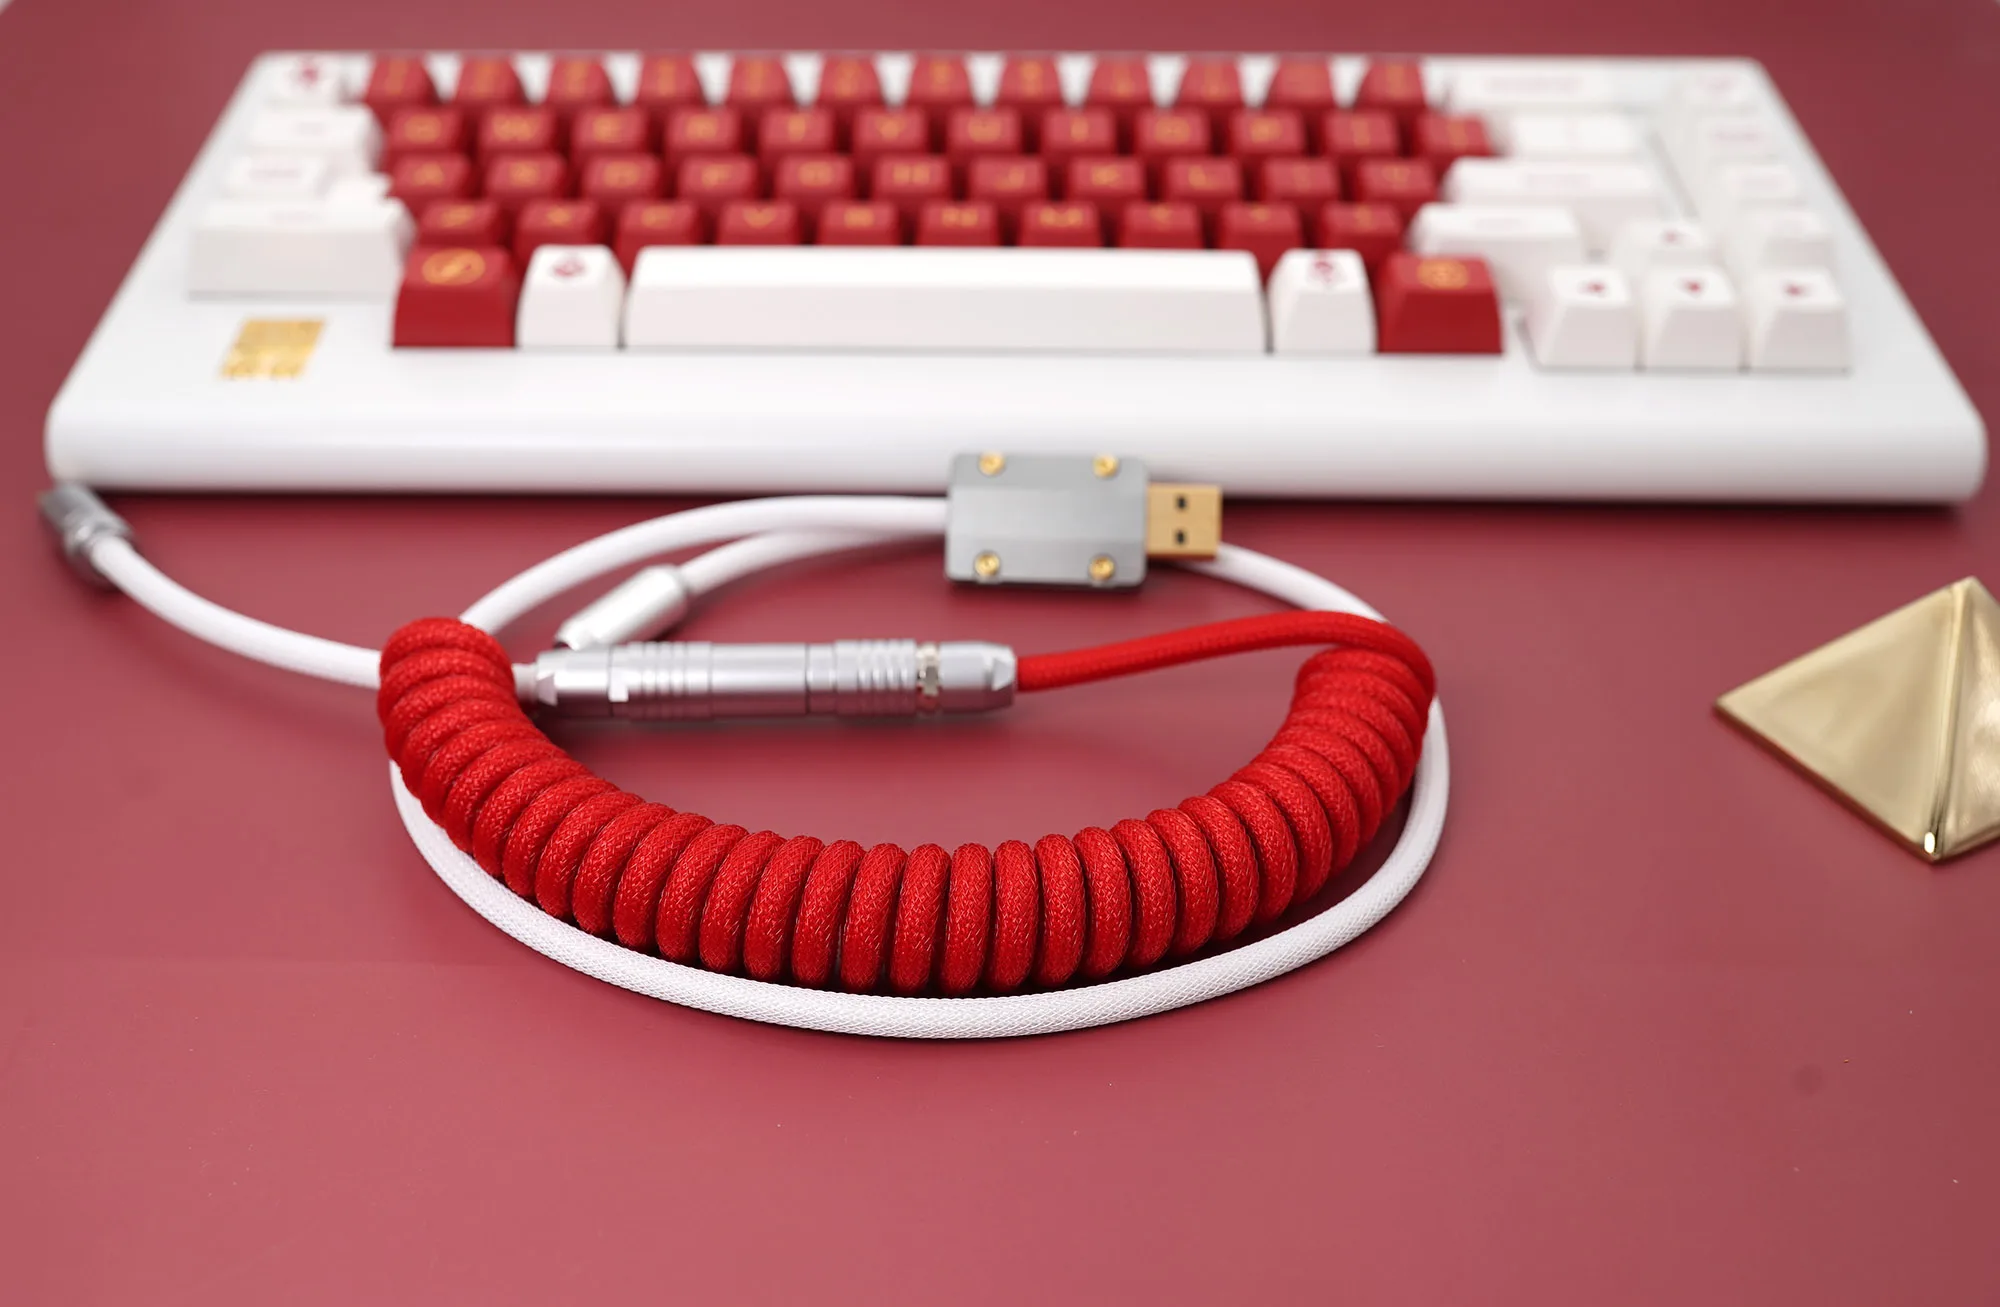 Spot GeekCable manual custom mechanical keyboard data line CA66 theme line red and white